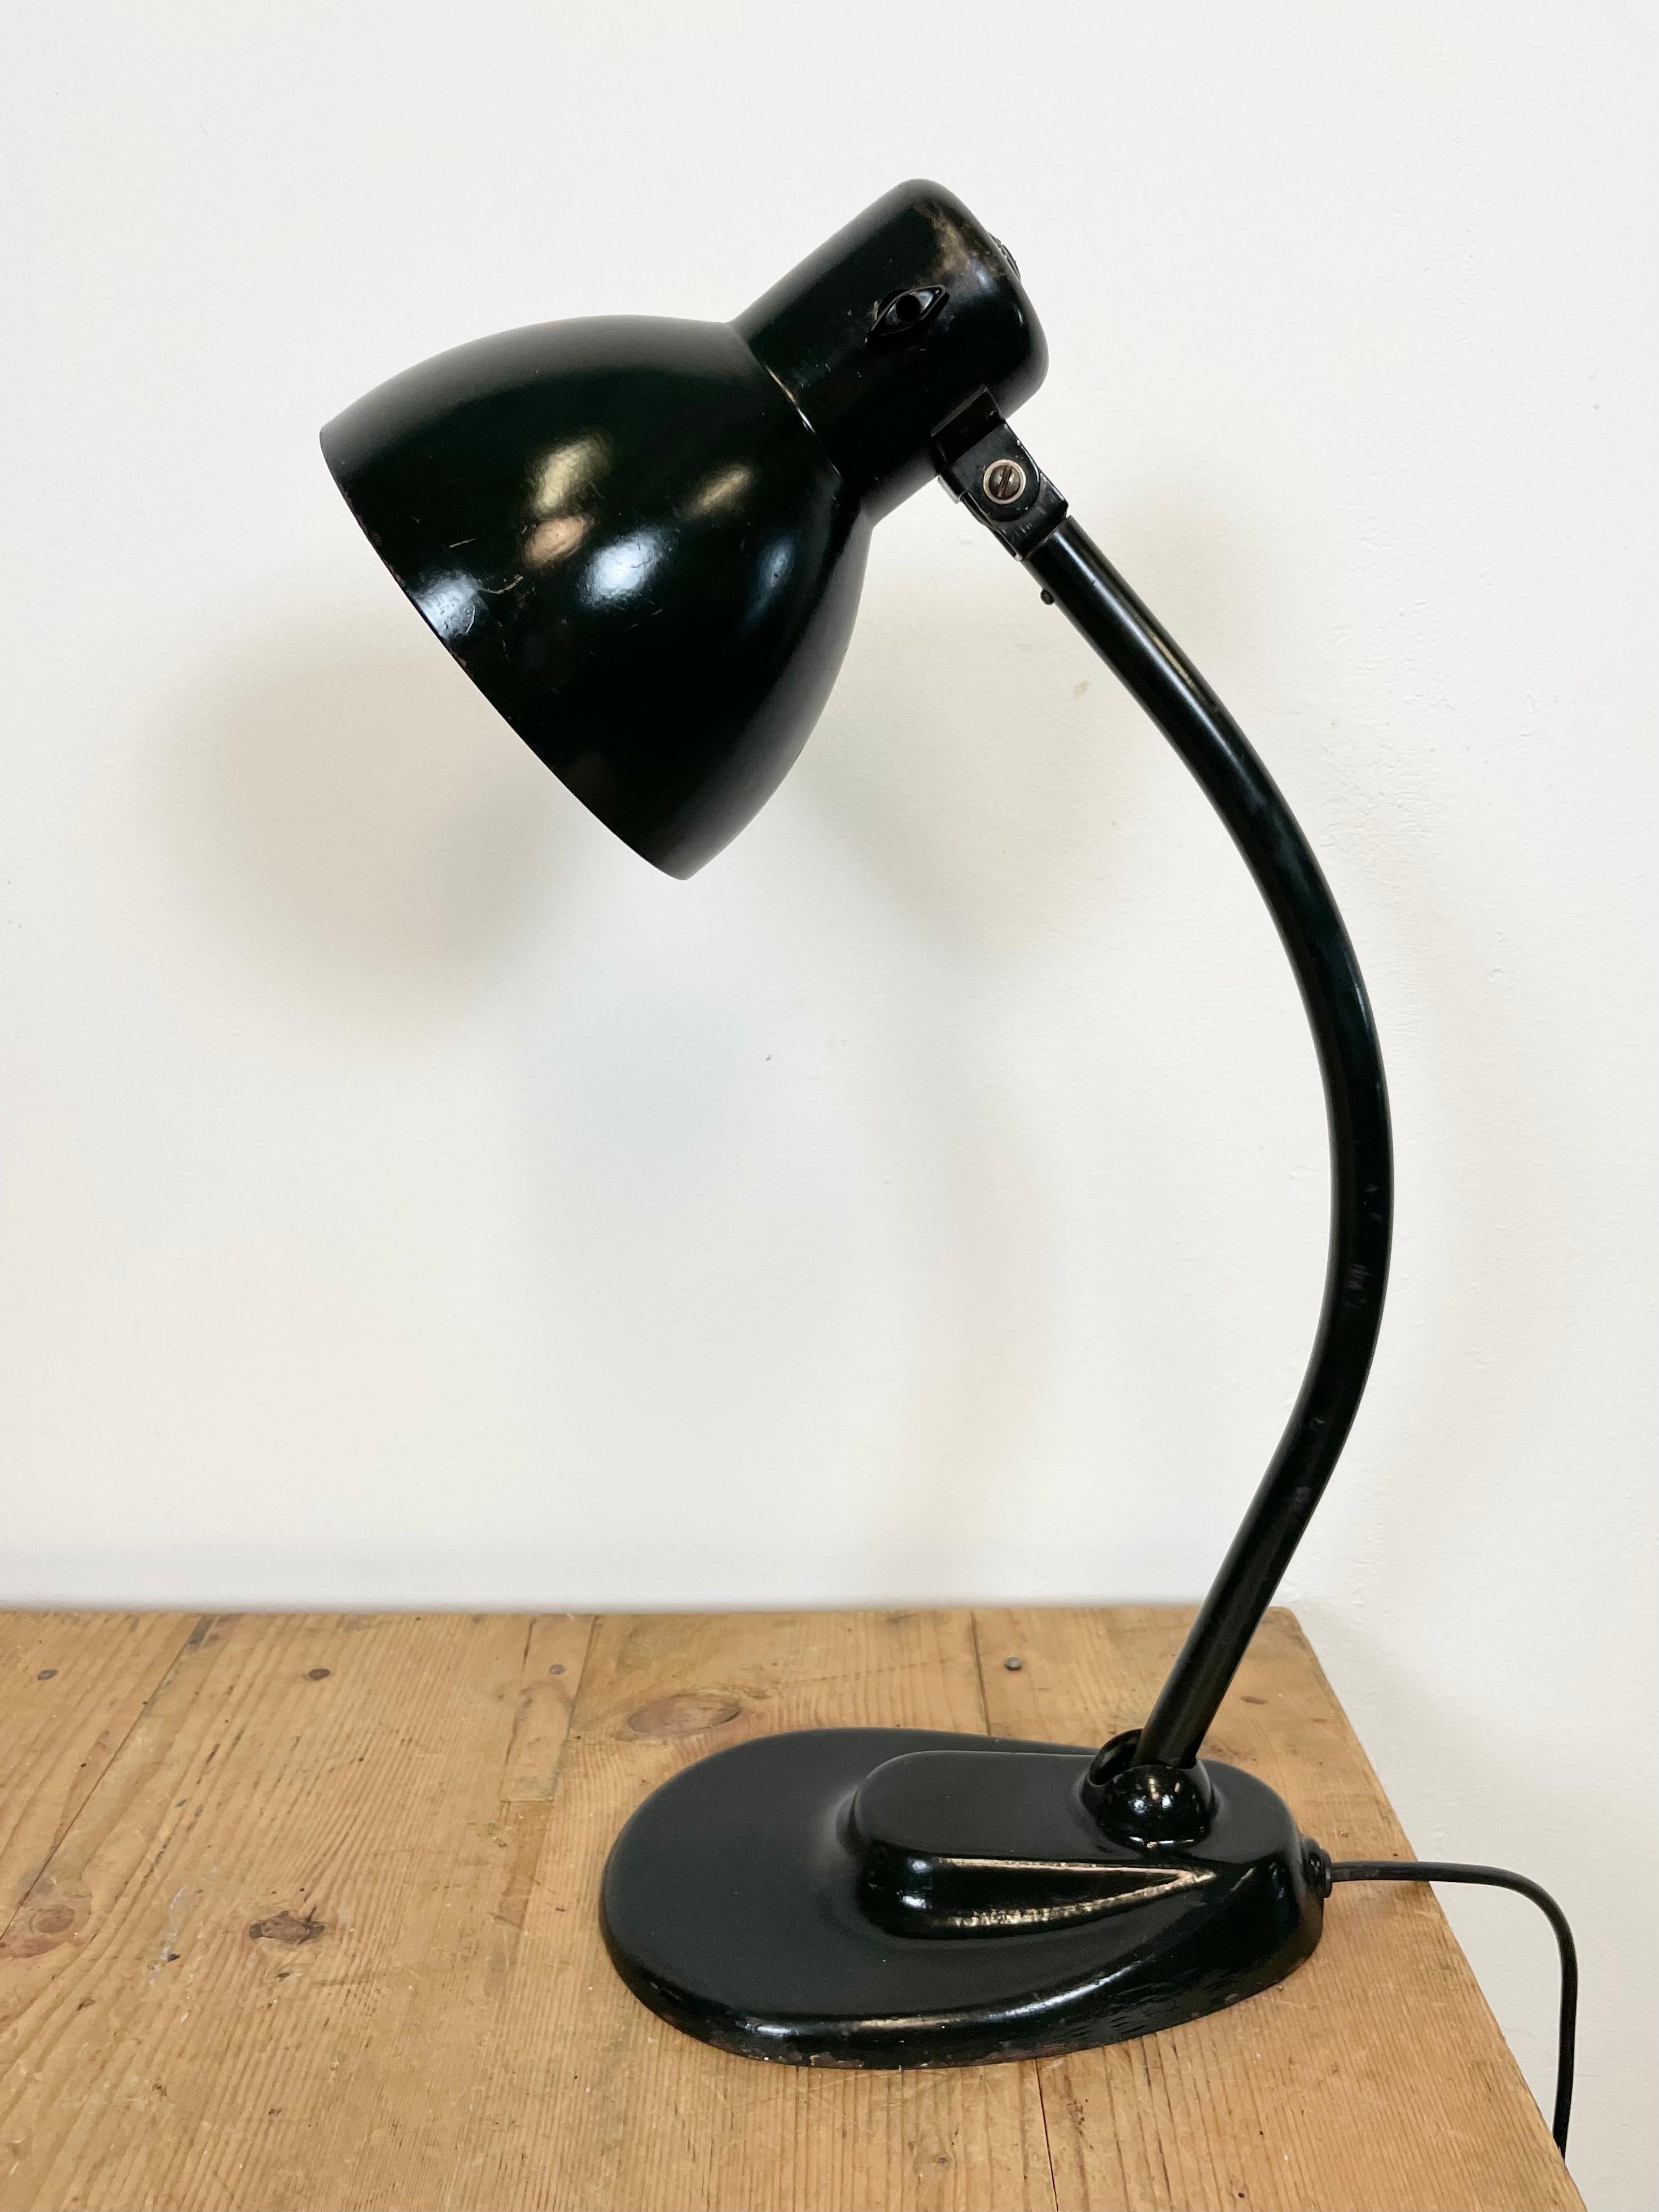 Dark green industrial Bauhaus table lamp made by Kandem Leuchten in Germany during the 1930s.